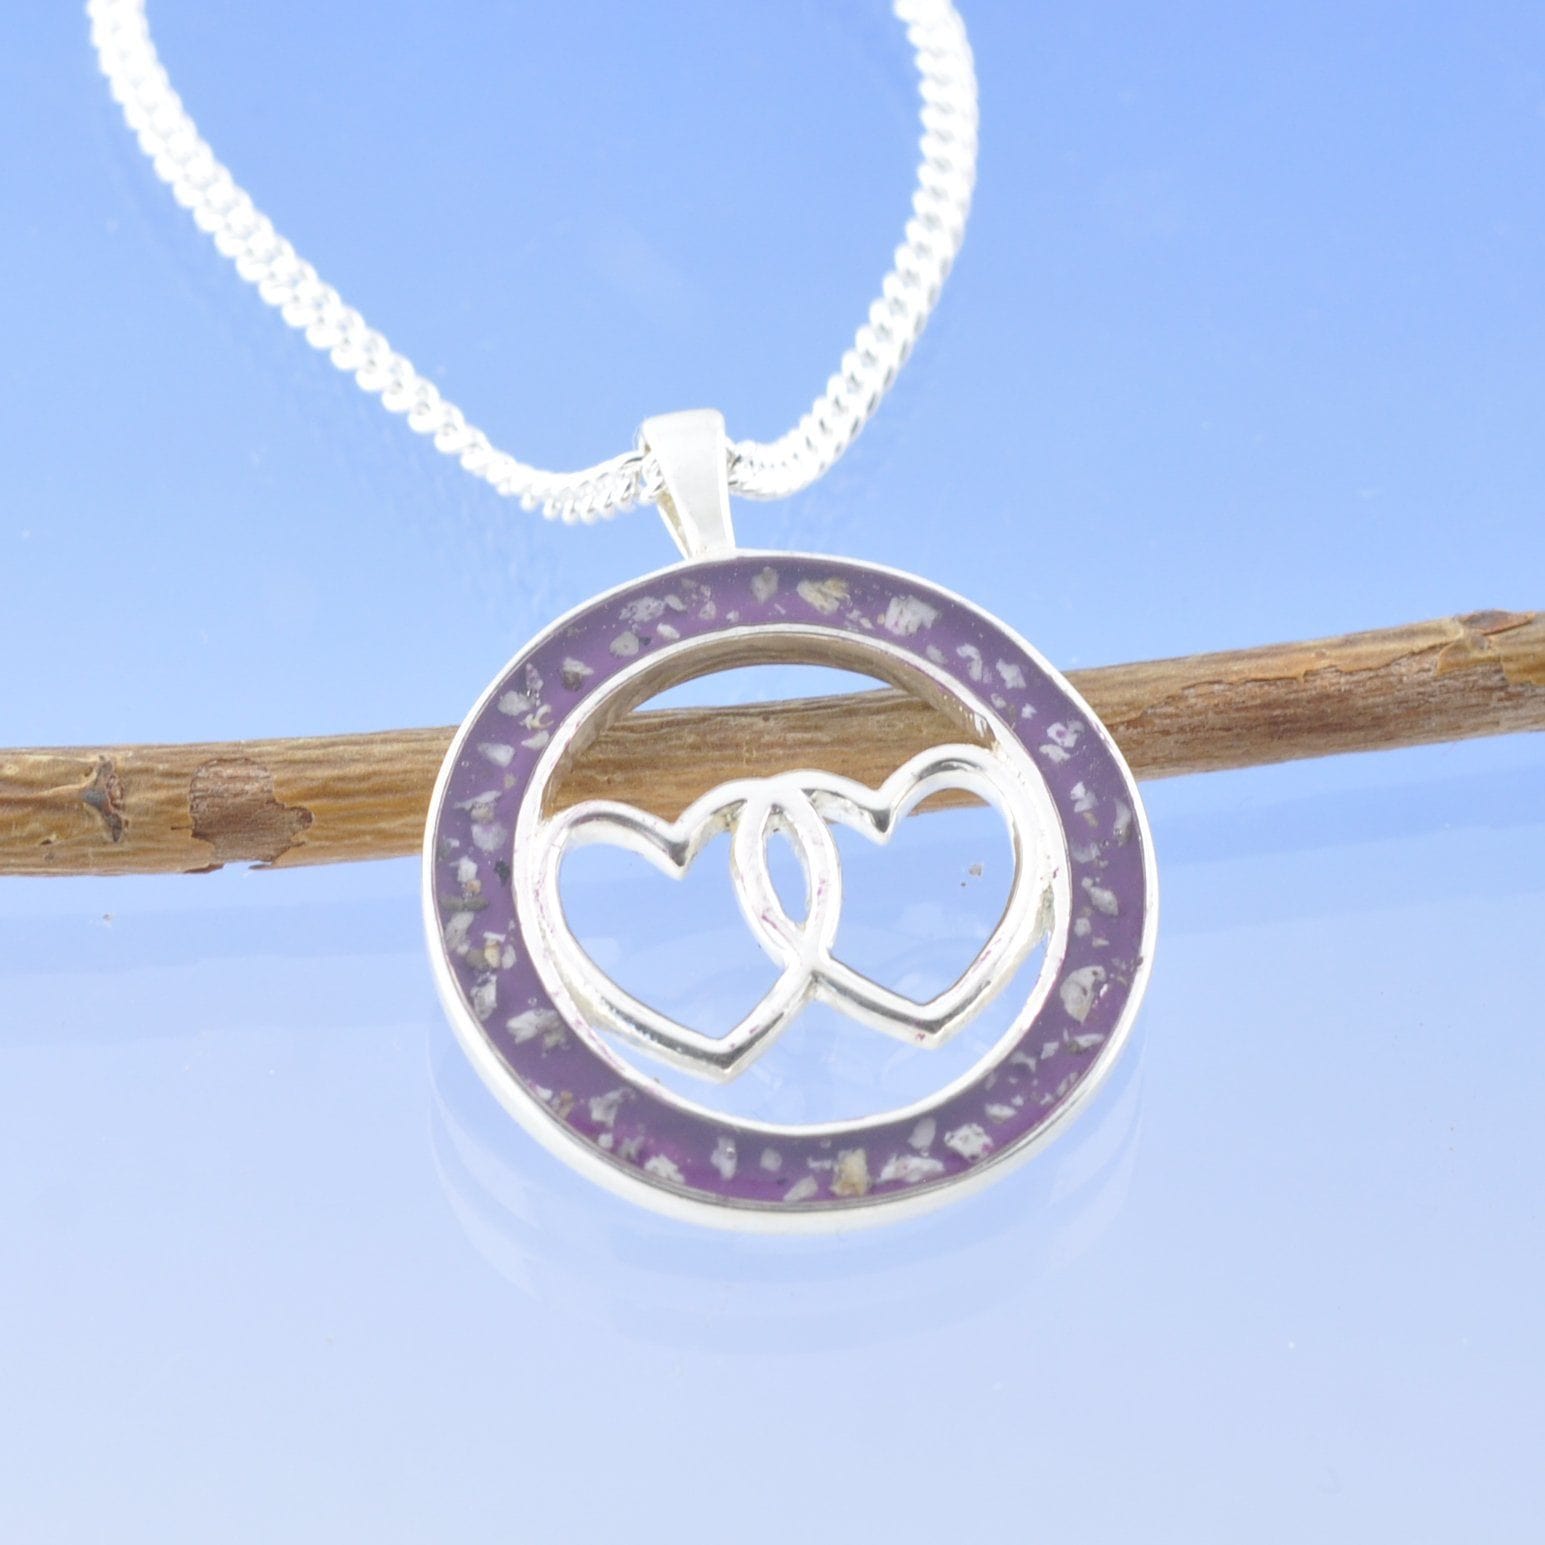 Cremation Ashes Necklace - Double Heart Halo Pendant by Chris Parry Jewellery